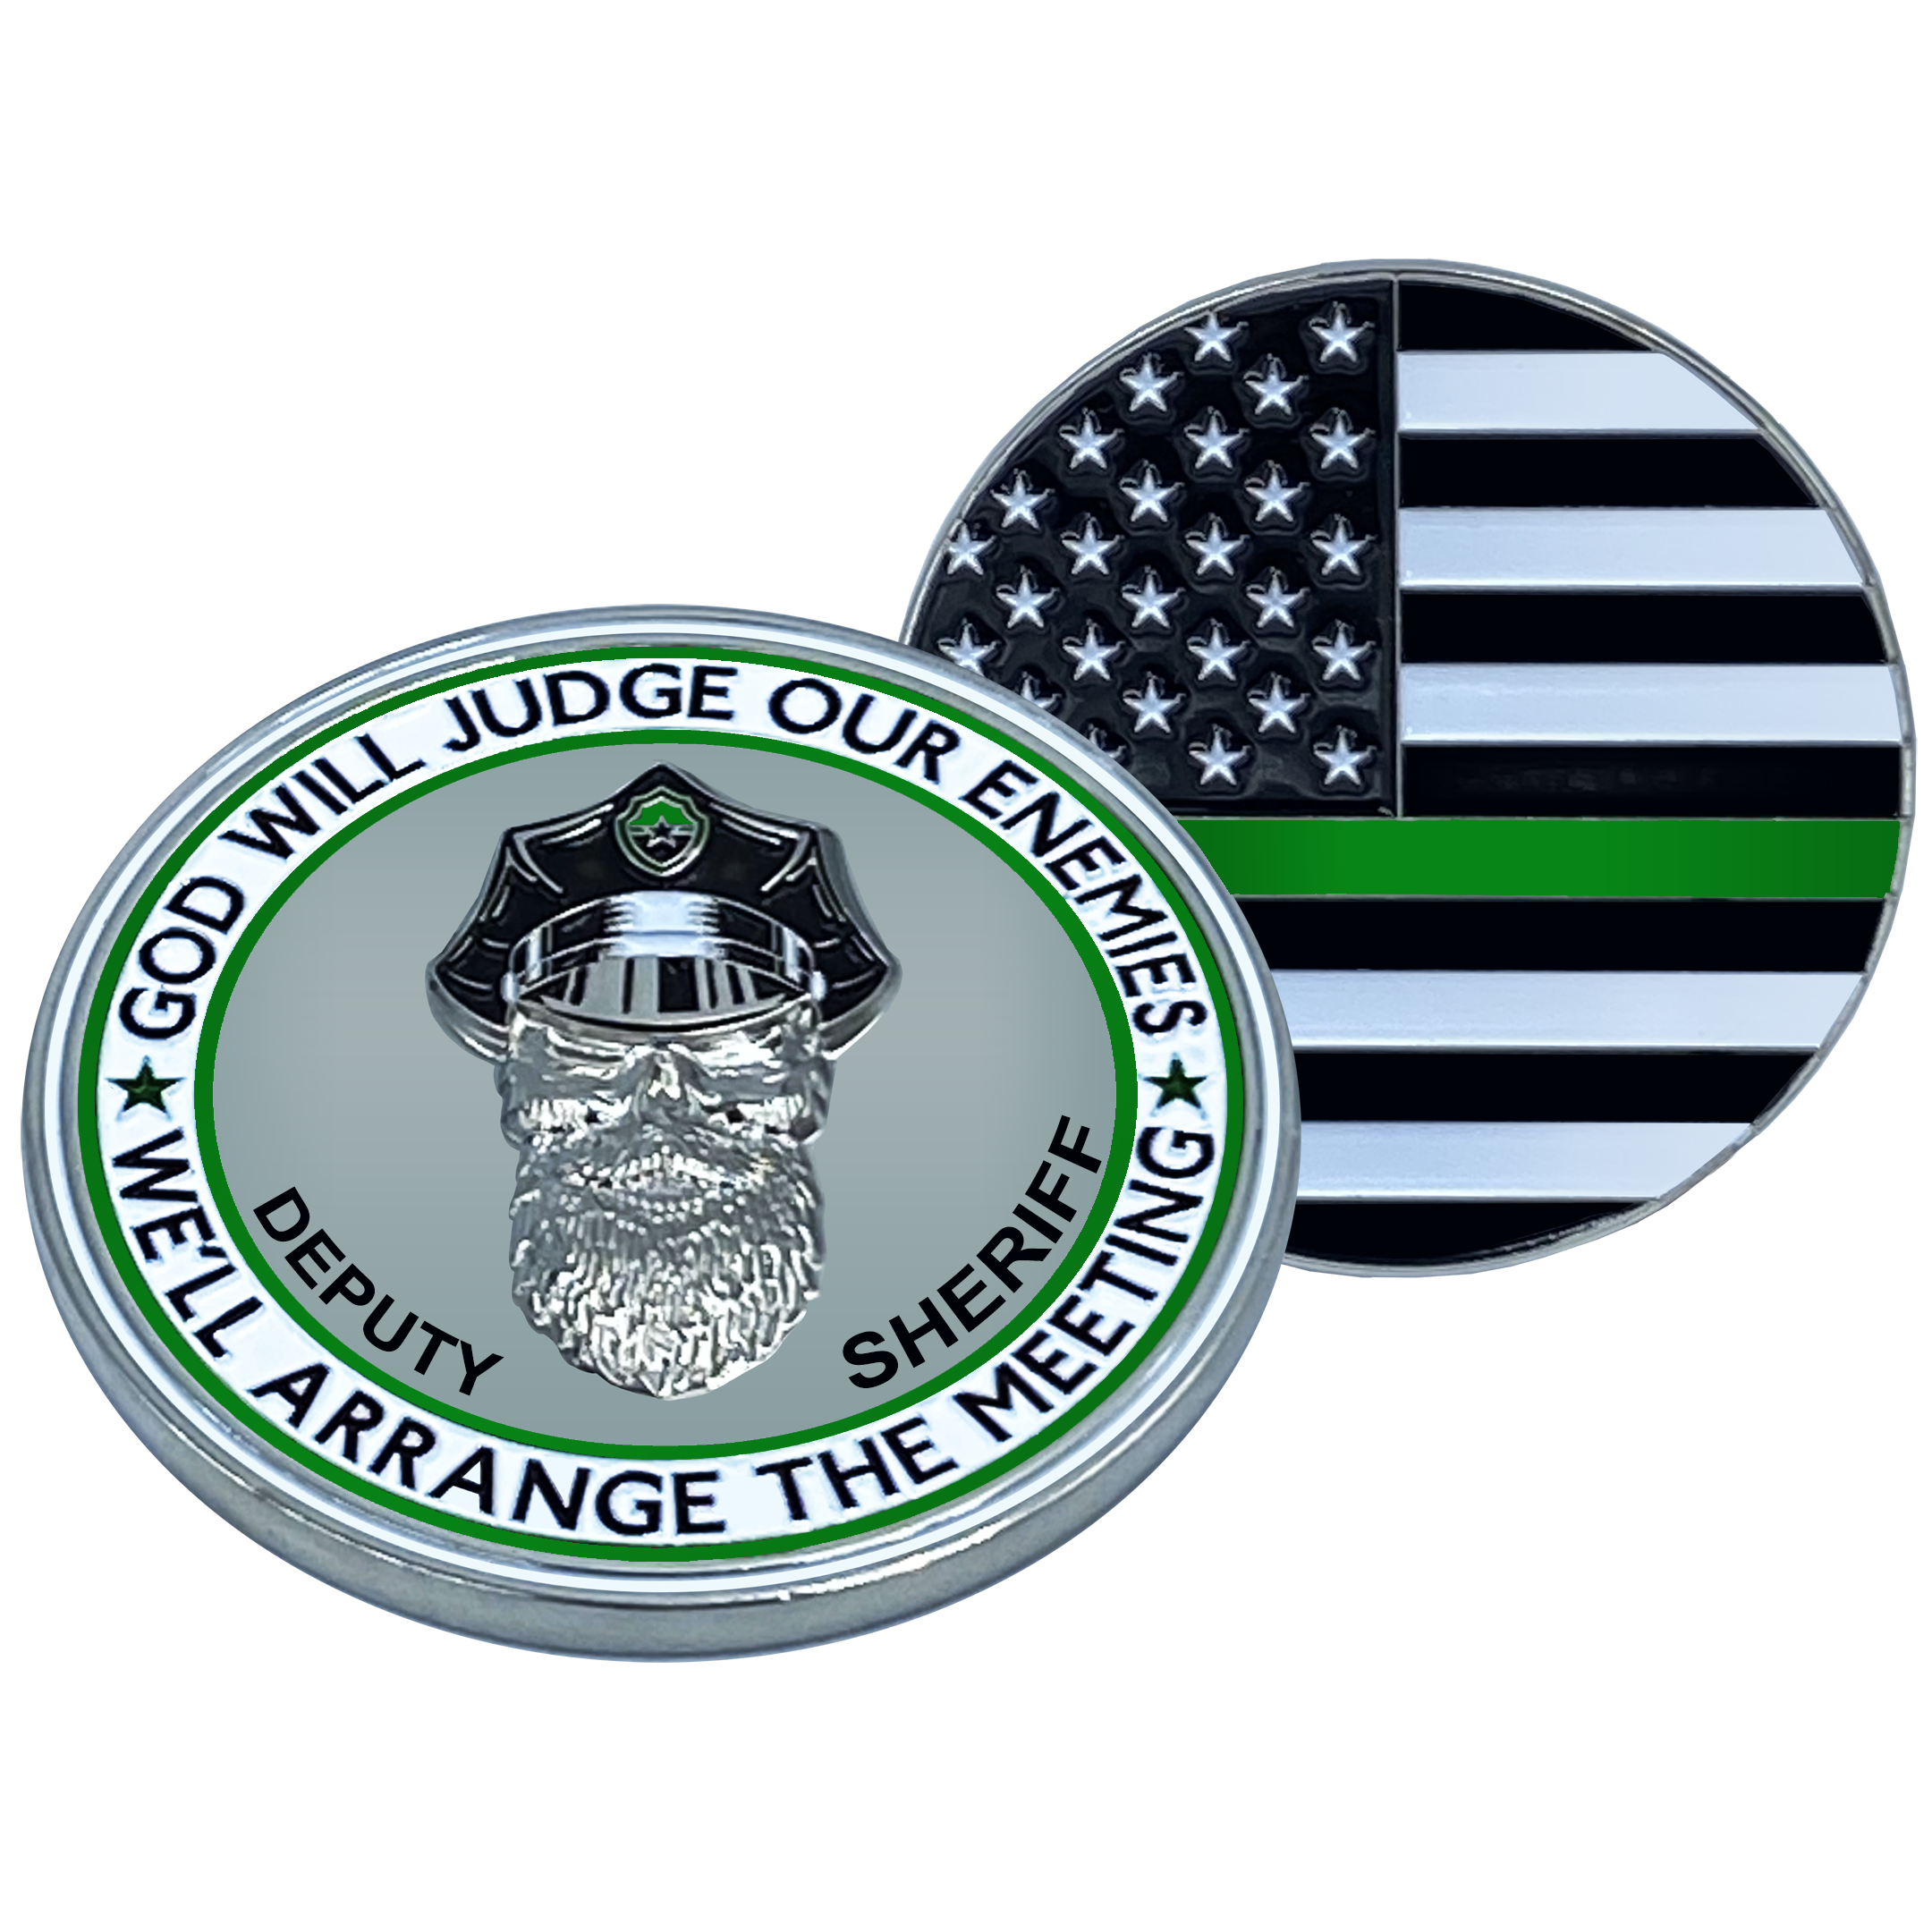 EL1-008 Thin Green Line DEPUTY SHERIFF Police God Will Judge BEARD GANG SKULL Challenge Coin City of Police Department Back the Blue